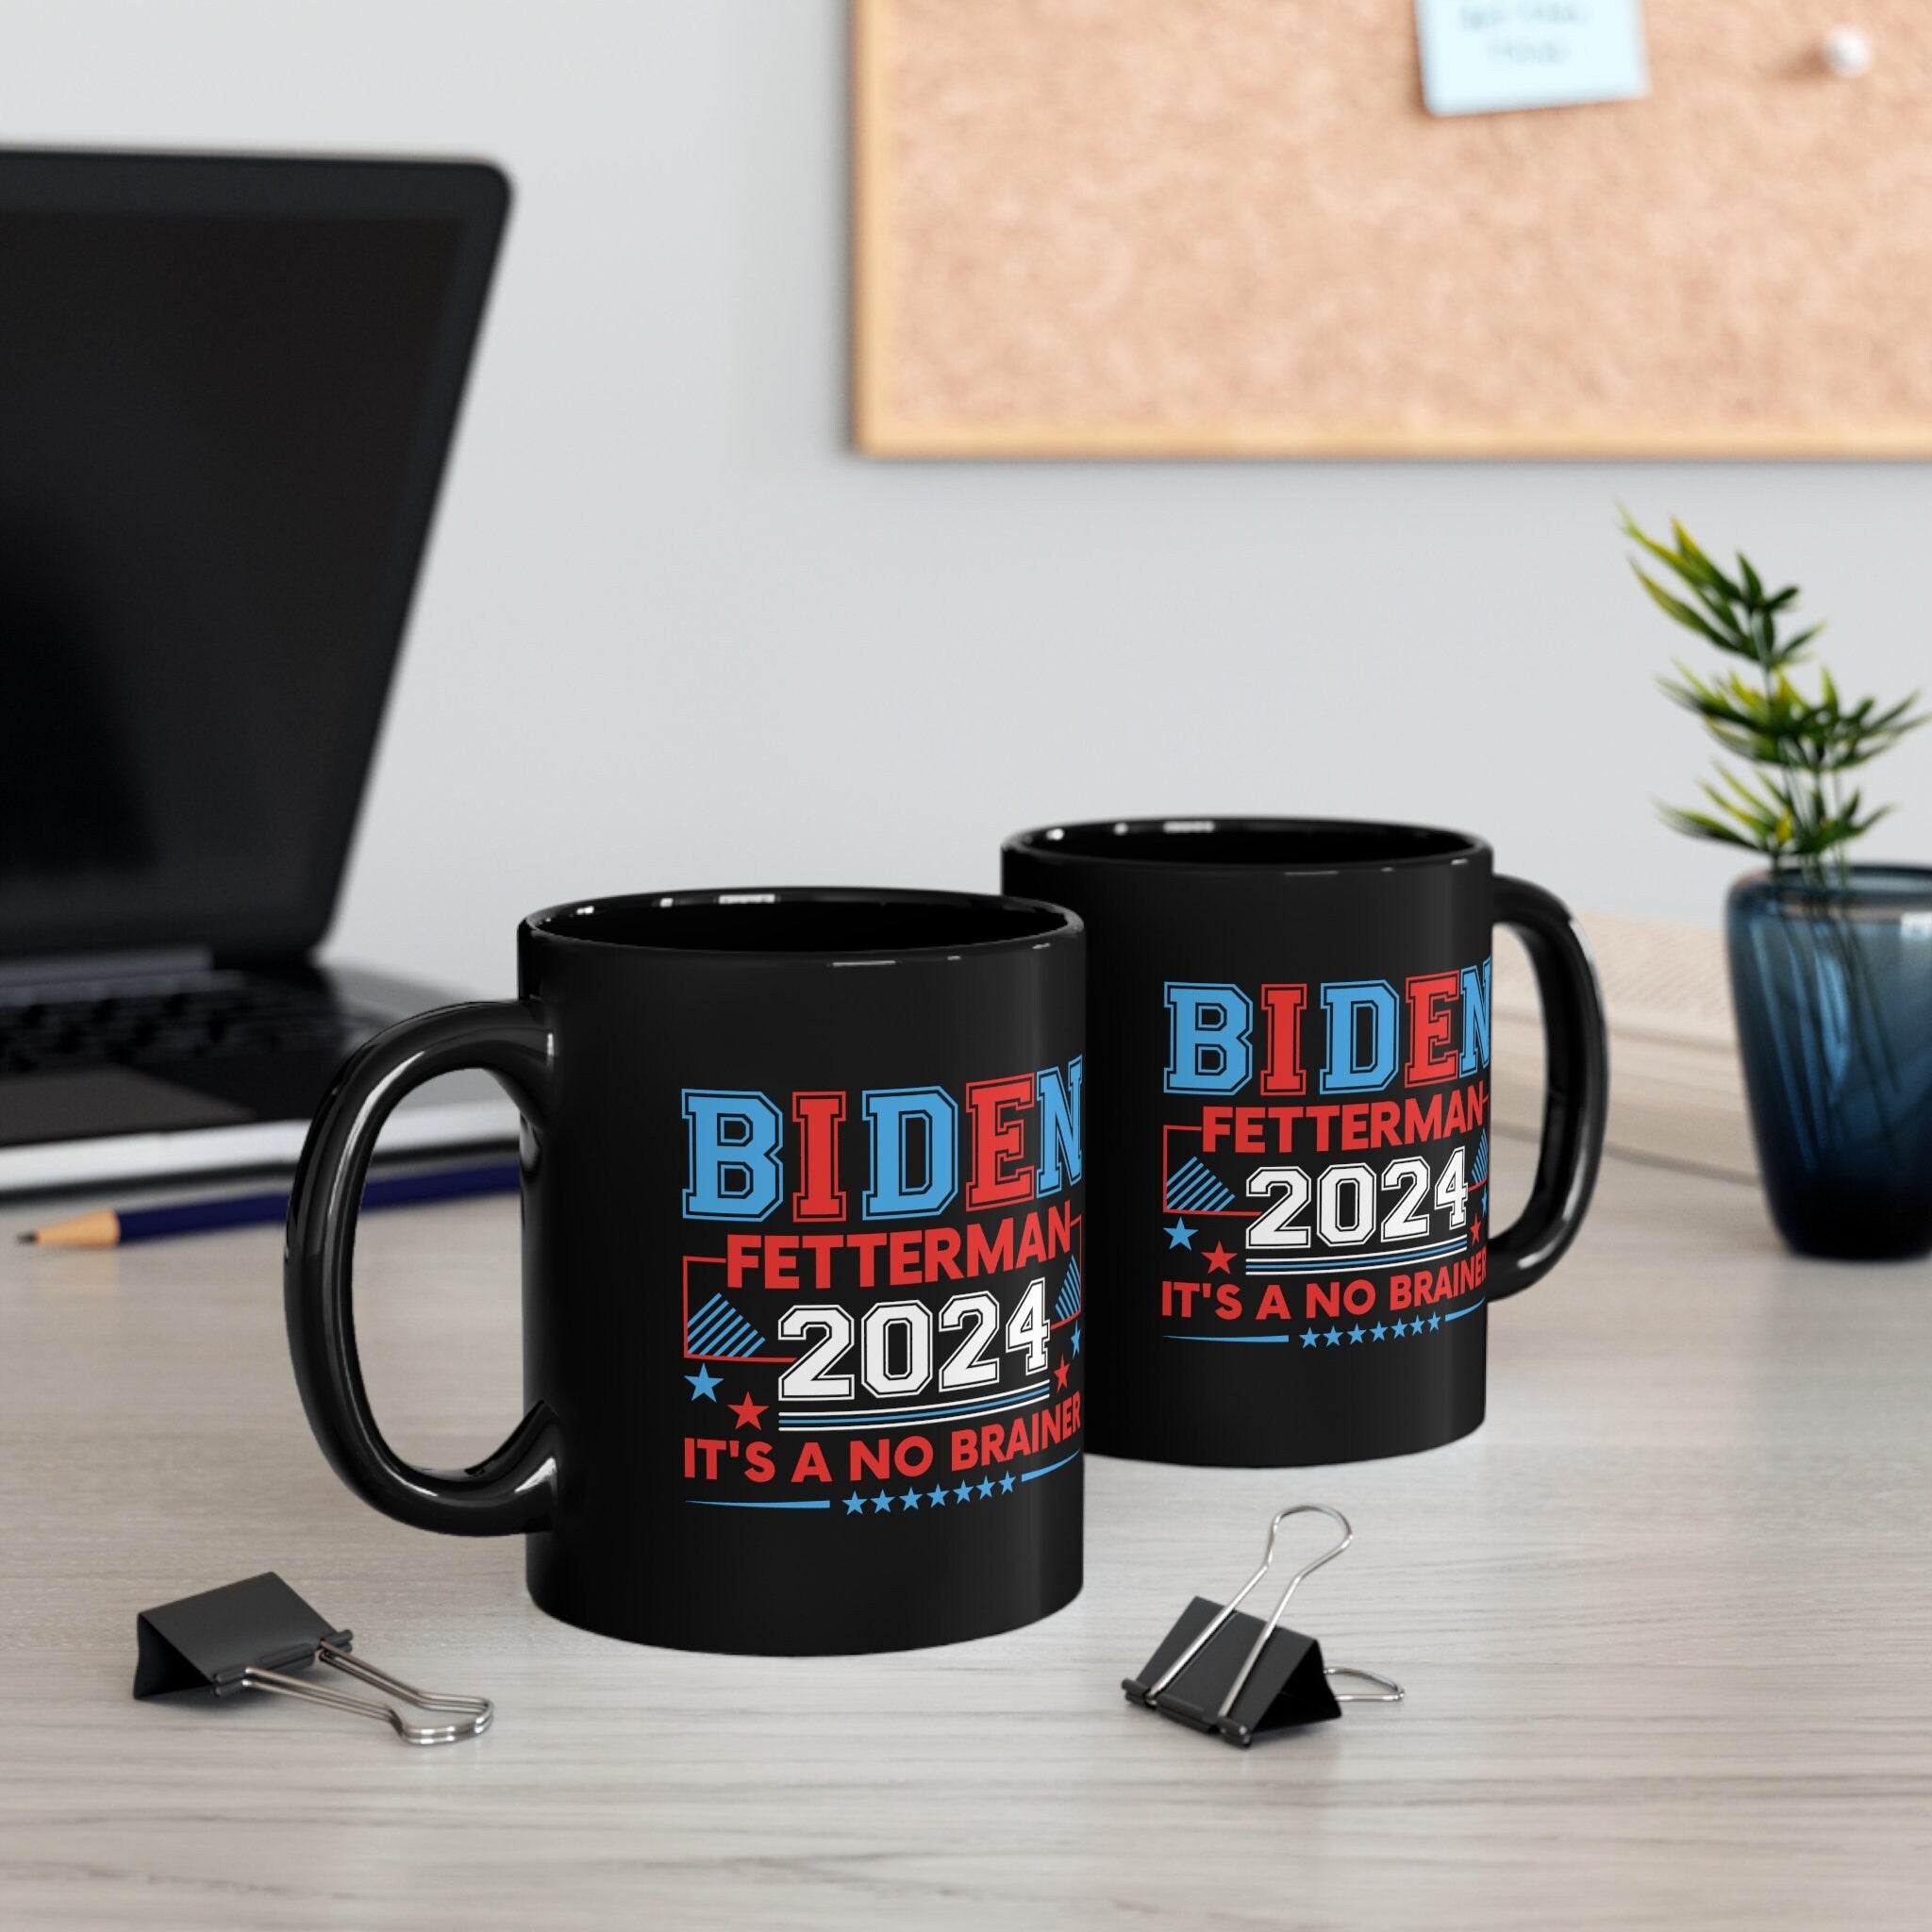 Biden Fetterman Campaign 2024 Its A No Brainer Mug, FJB, Anti Biden Political Mug, Gifts for Republican, Conservative Coffee Cup, Great Gift